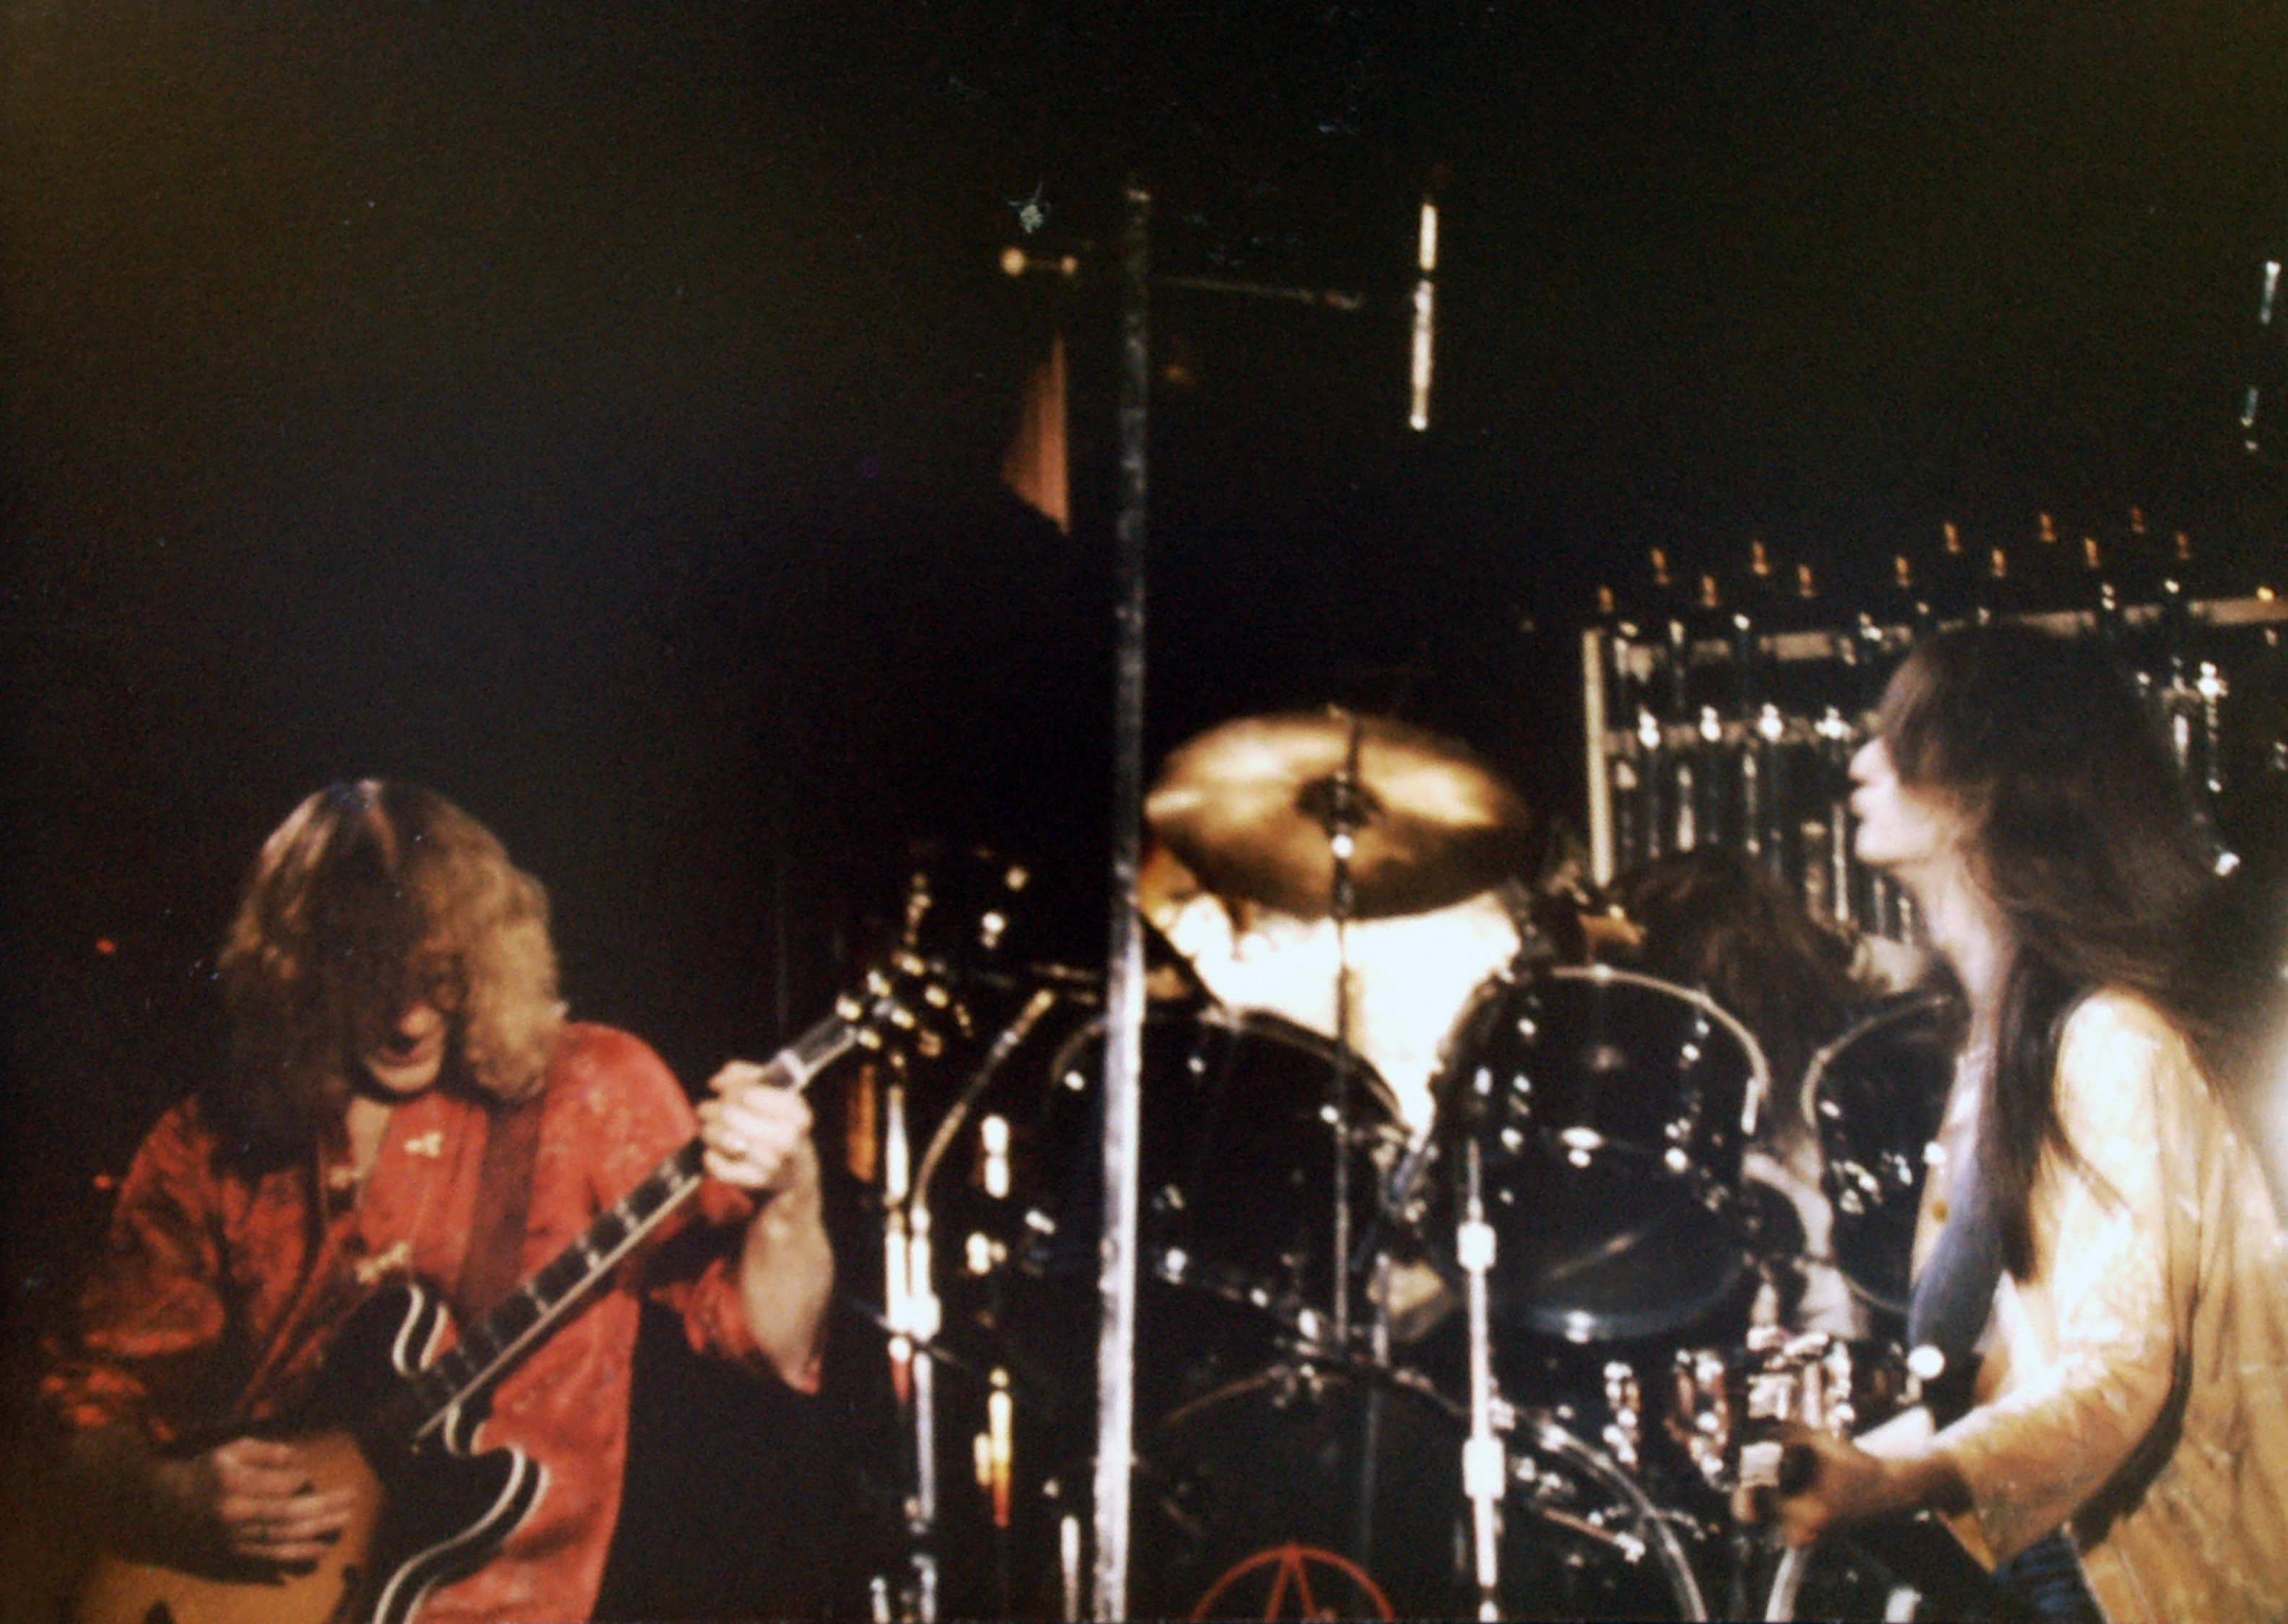 Rush 'A Farewell to Kings' Tour Pictures - Louisville Gardens - Louisville, Kentucky - January 19th, 1978